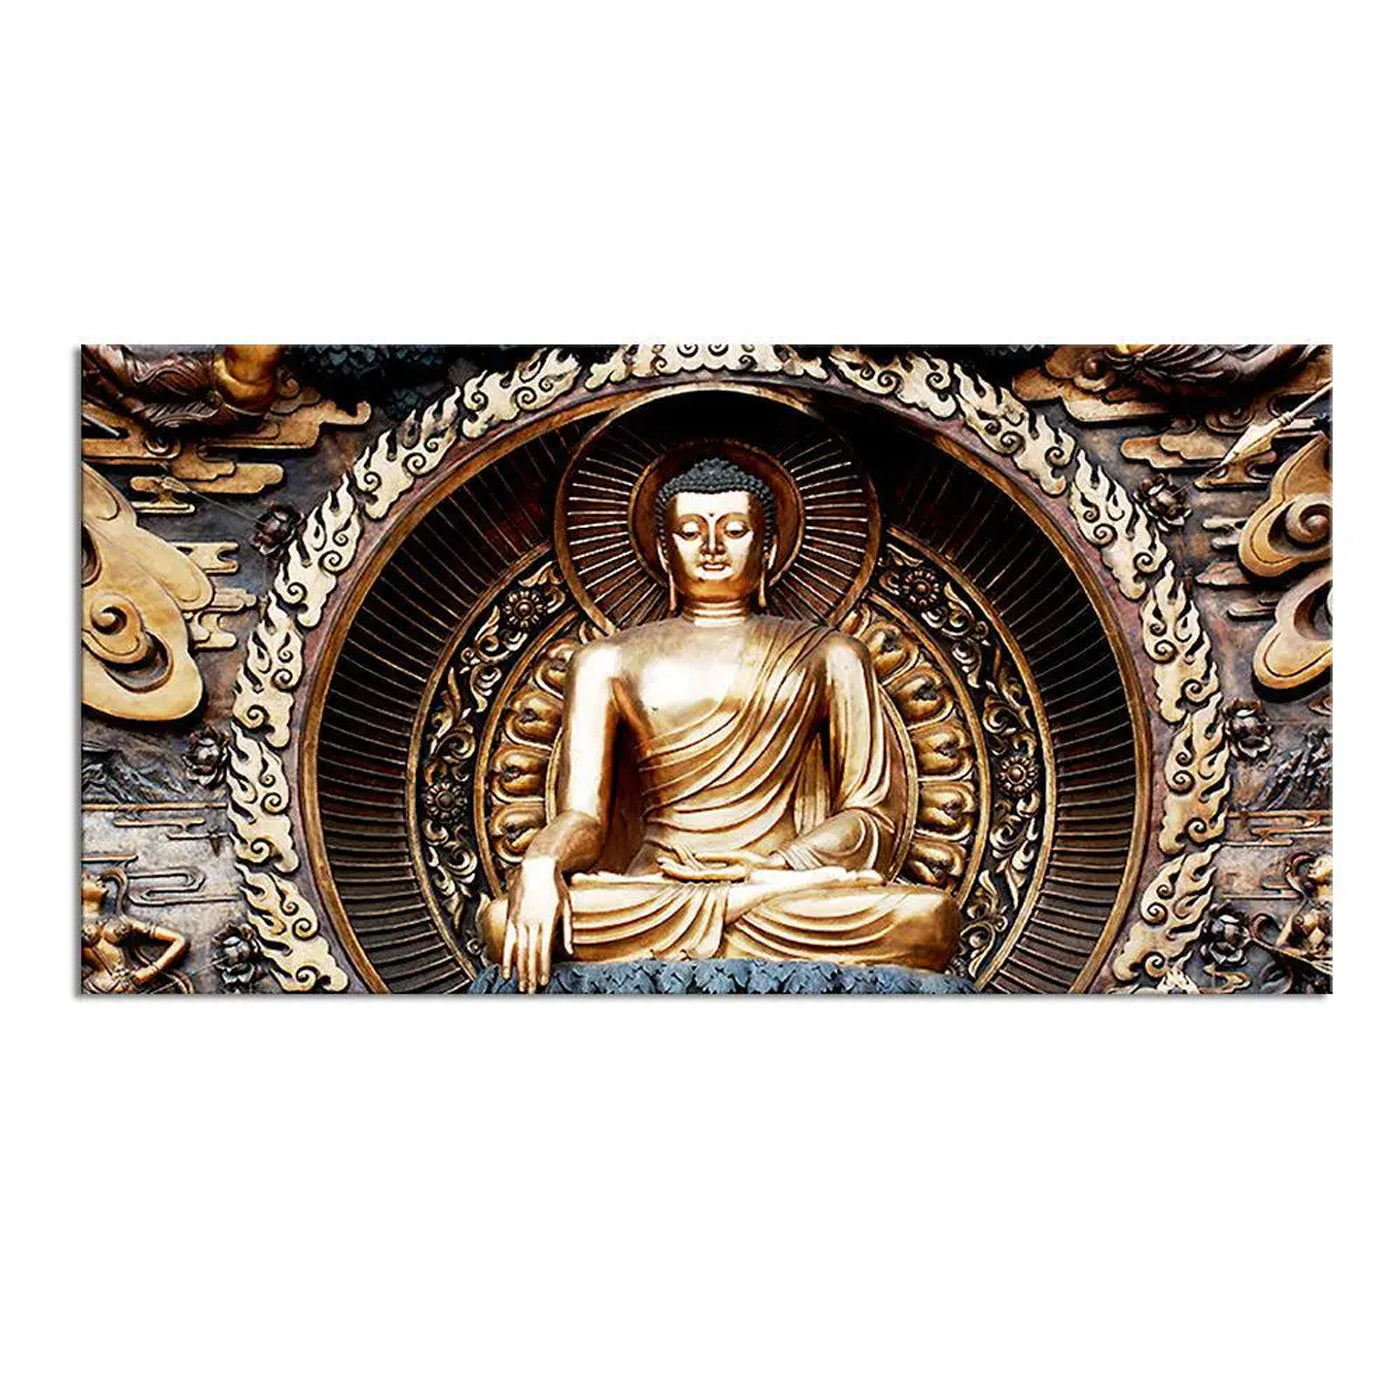 Meditating Buddha sculpture canvas wall painting with Floating frame